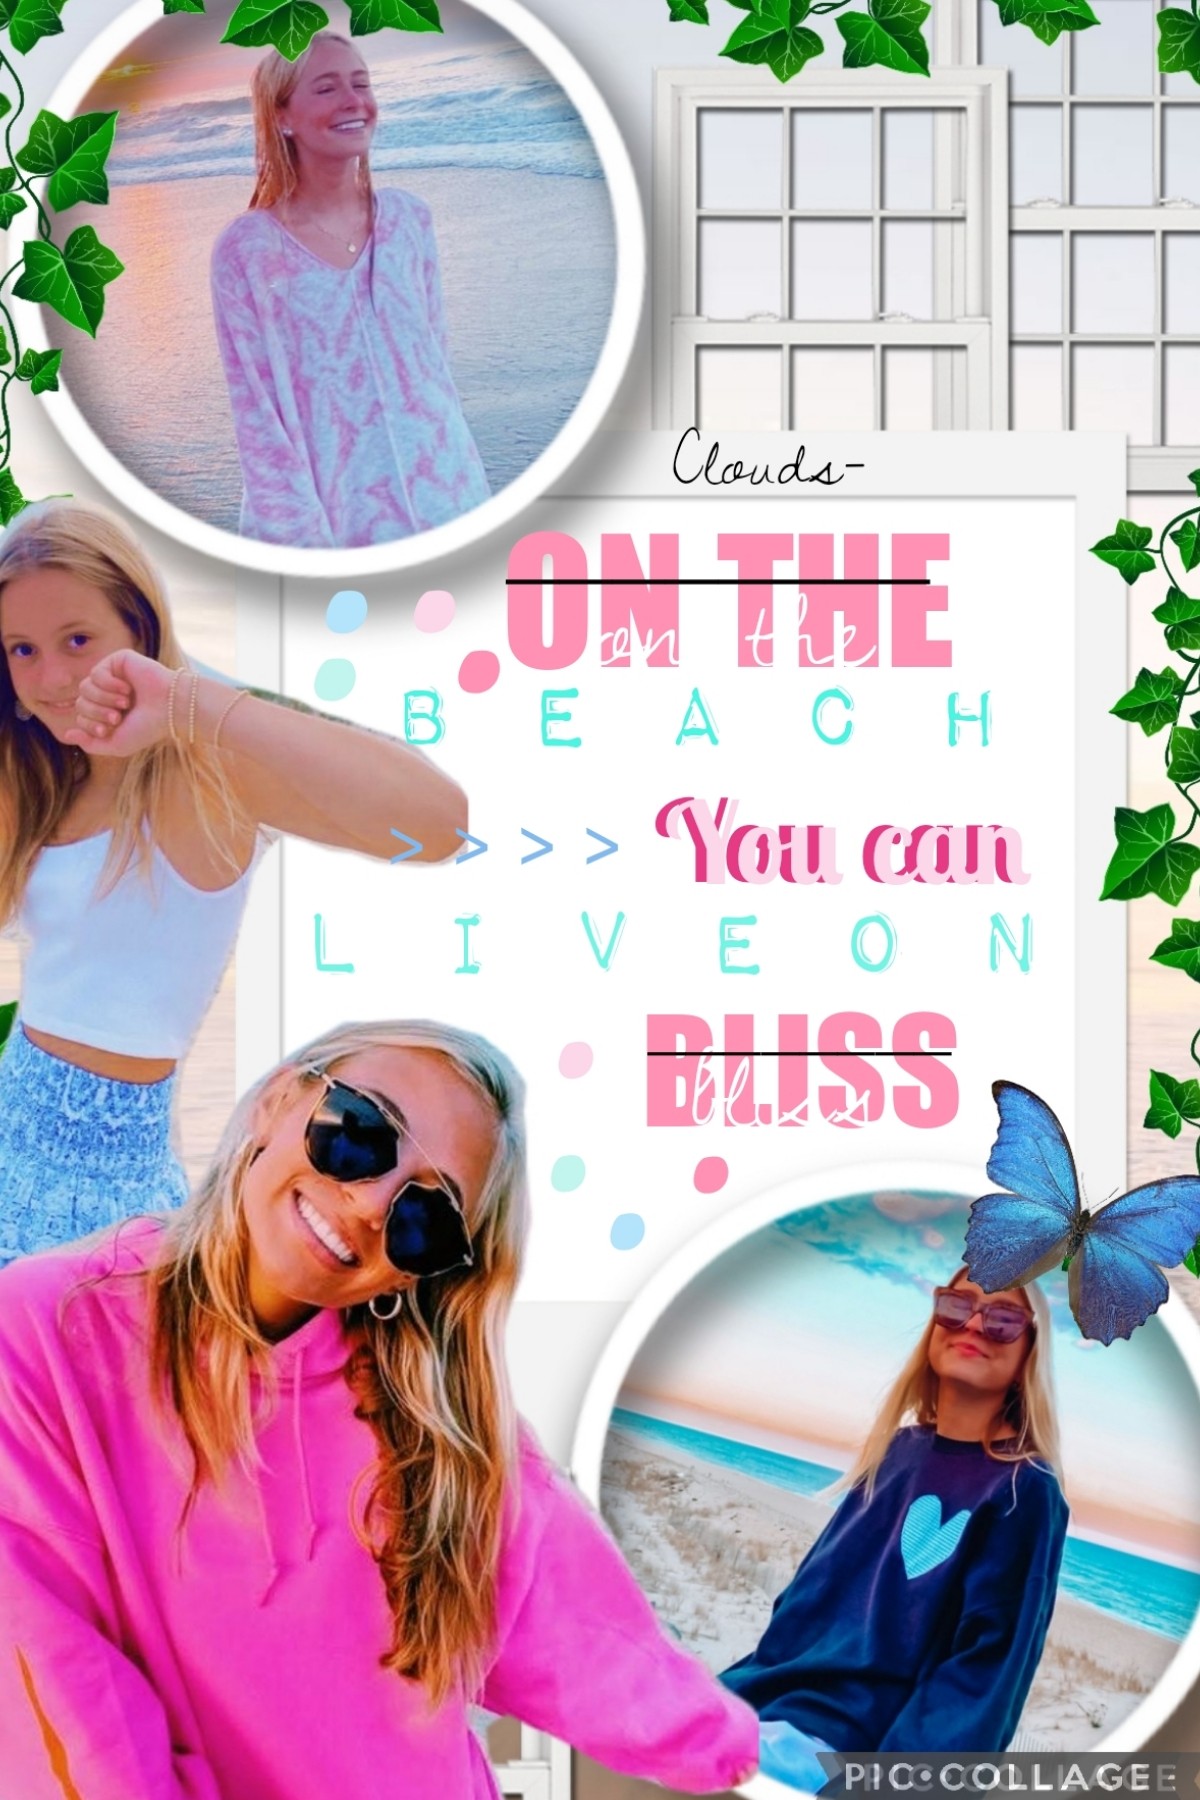               ⚡️TAP⚡️

    hey everyone! ♡ hope everyone is enjoying the summer hols! 💕 ahh, I tried preppy and I'm pretty proud of what I did 😅 tell me your thoughts about this collage 💕
  Inspo creds: -pretty_little_things- 💕⚡️
QOTD: Favourite holiday?
